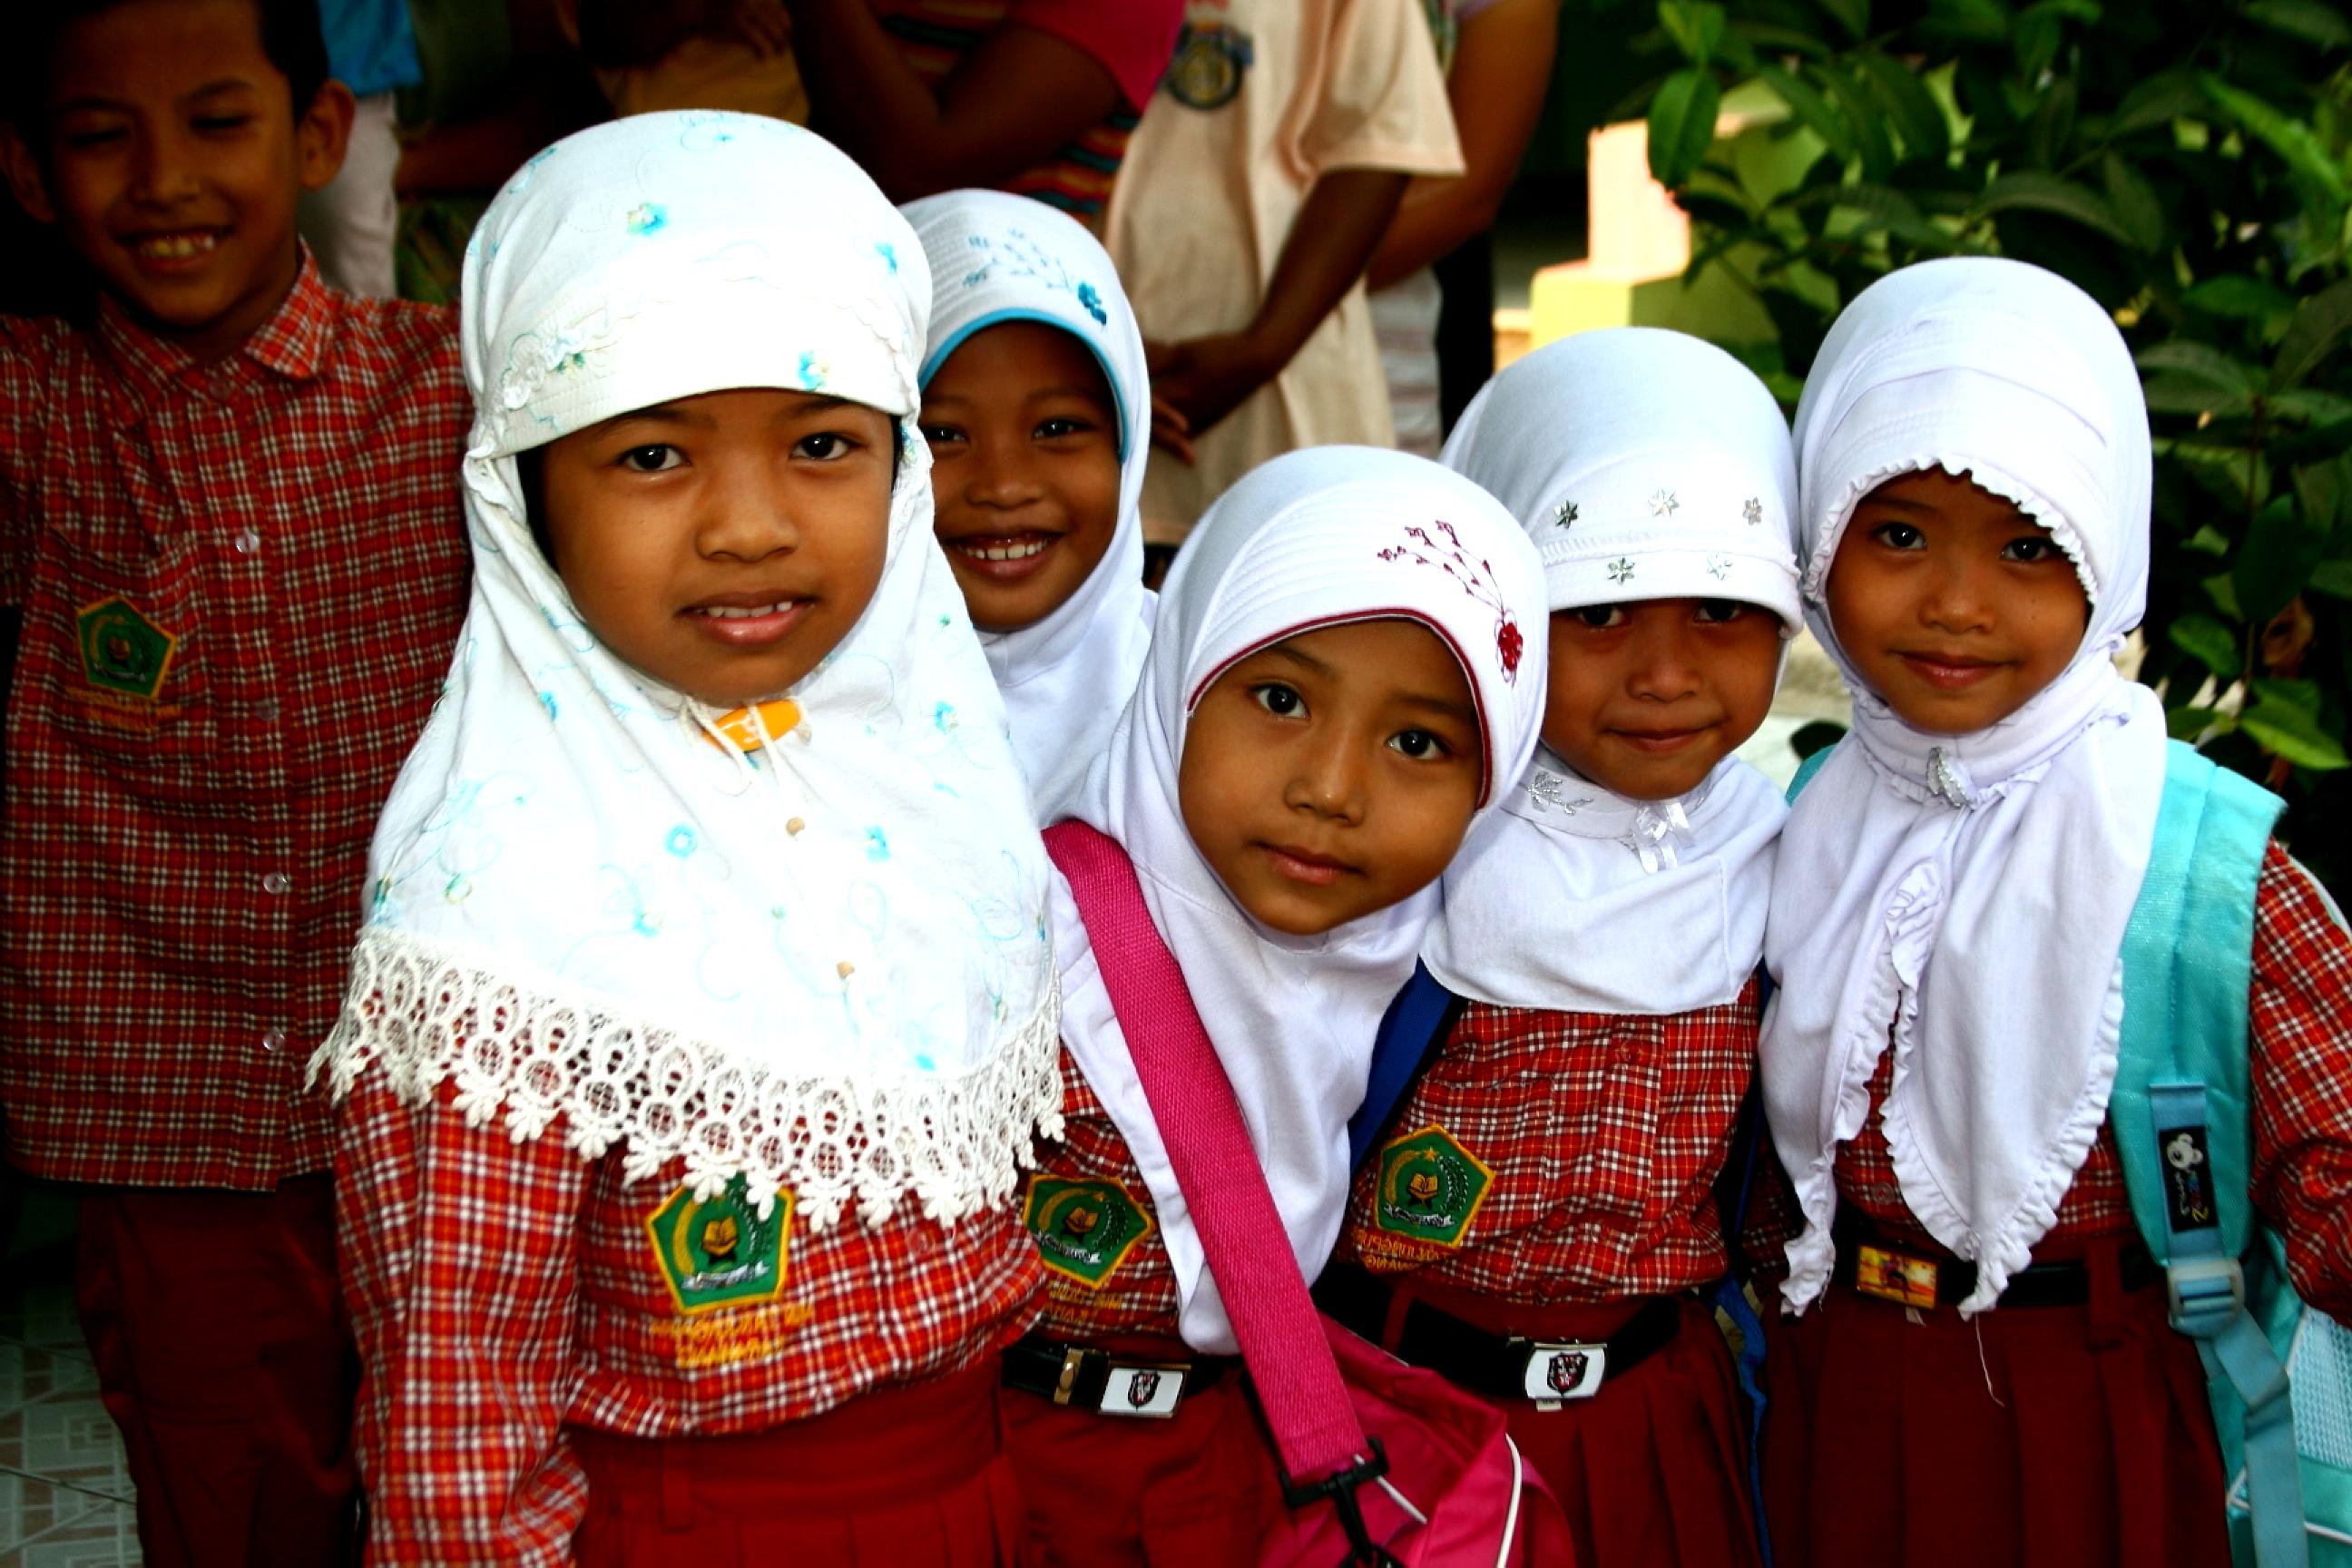 Indonesia young girls pic